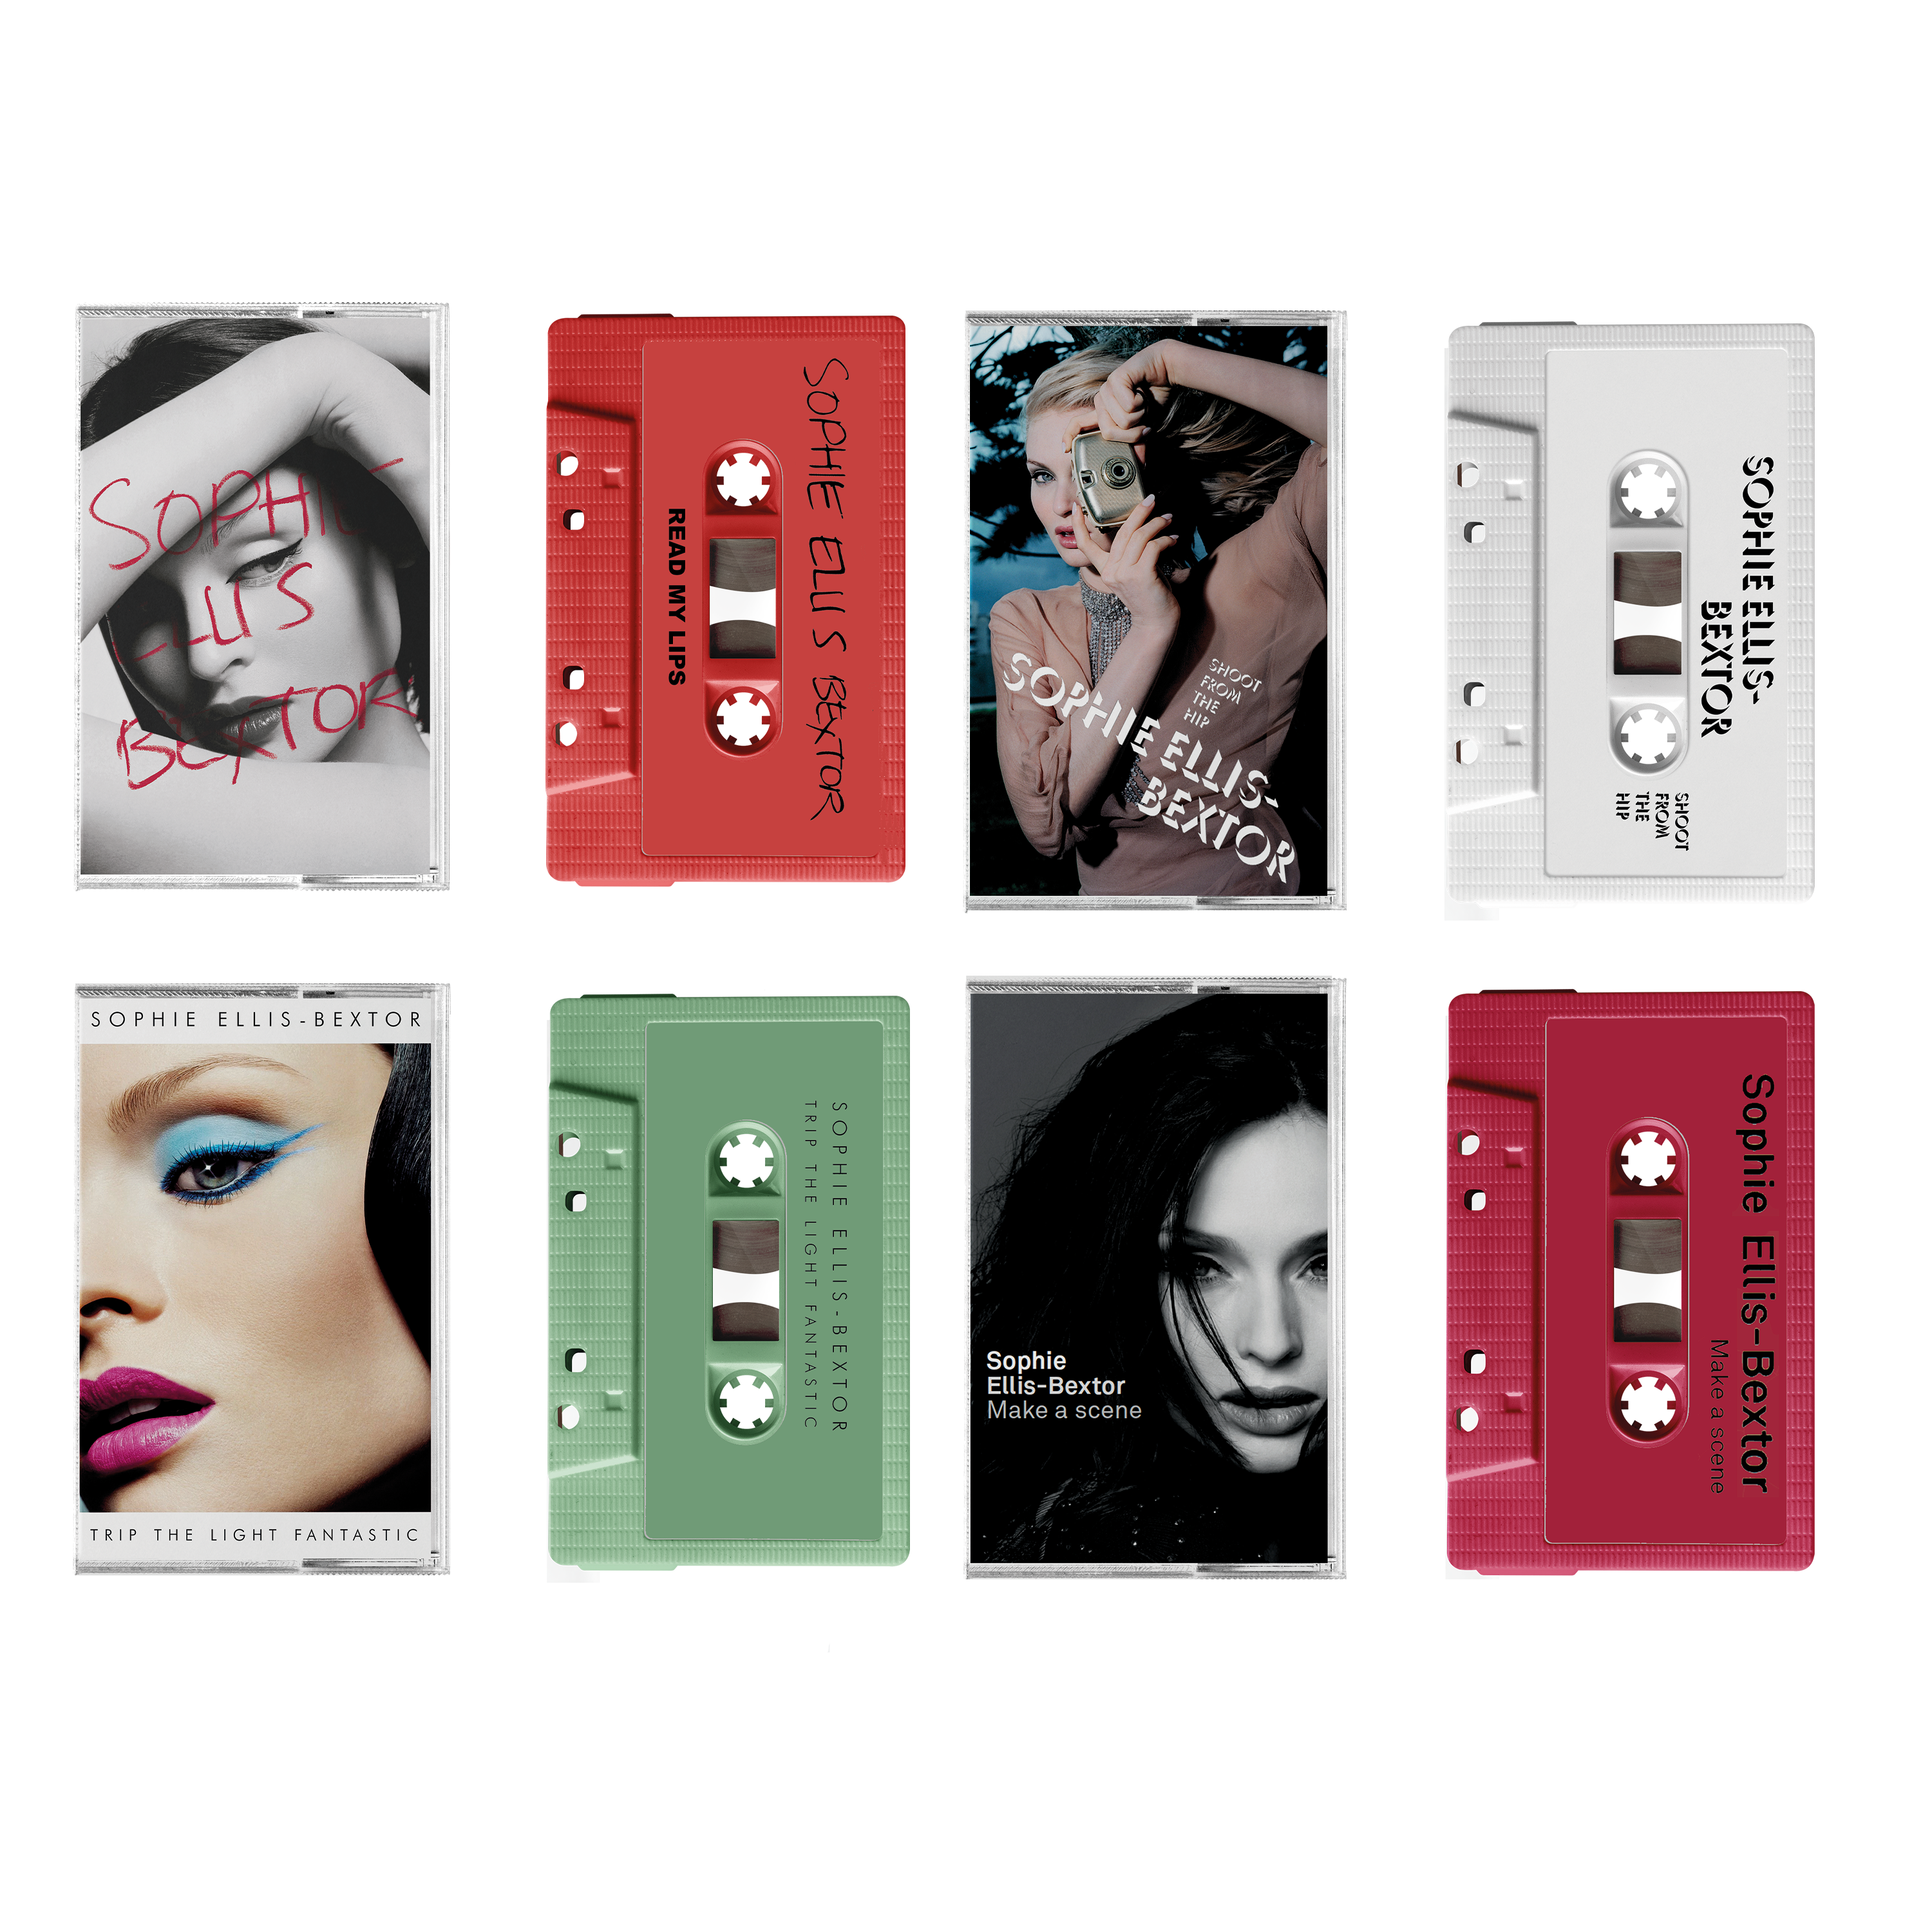 Also Available in The SEB Cassette Bundle